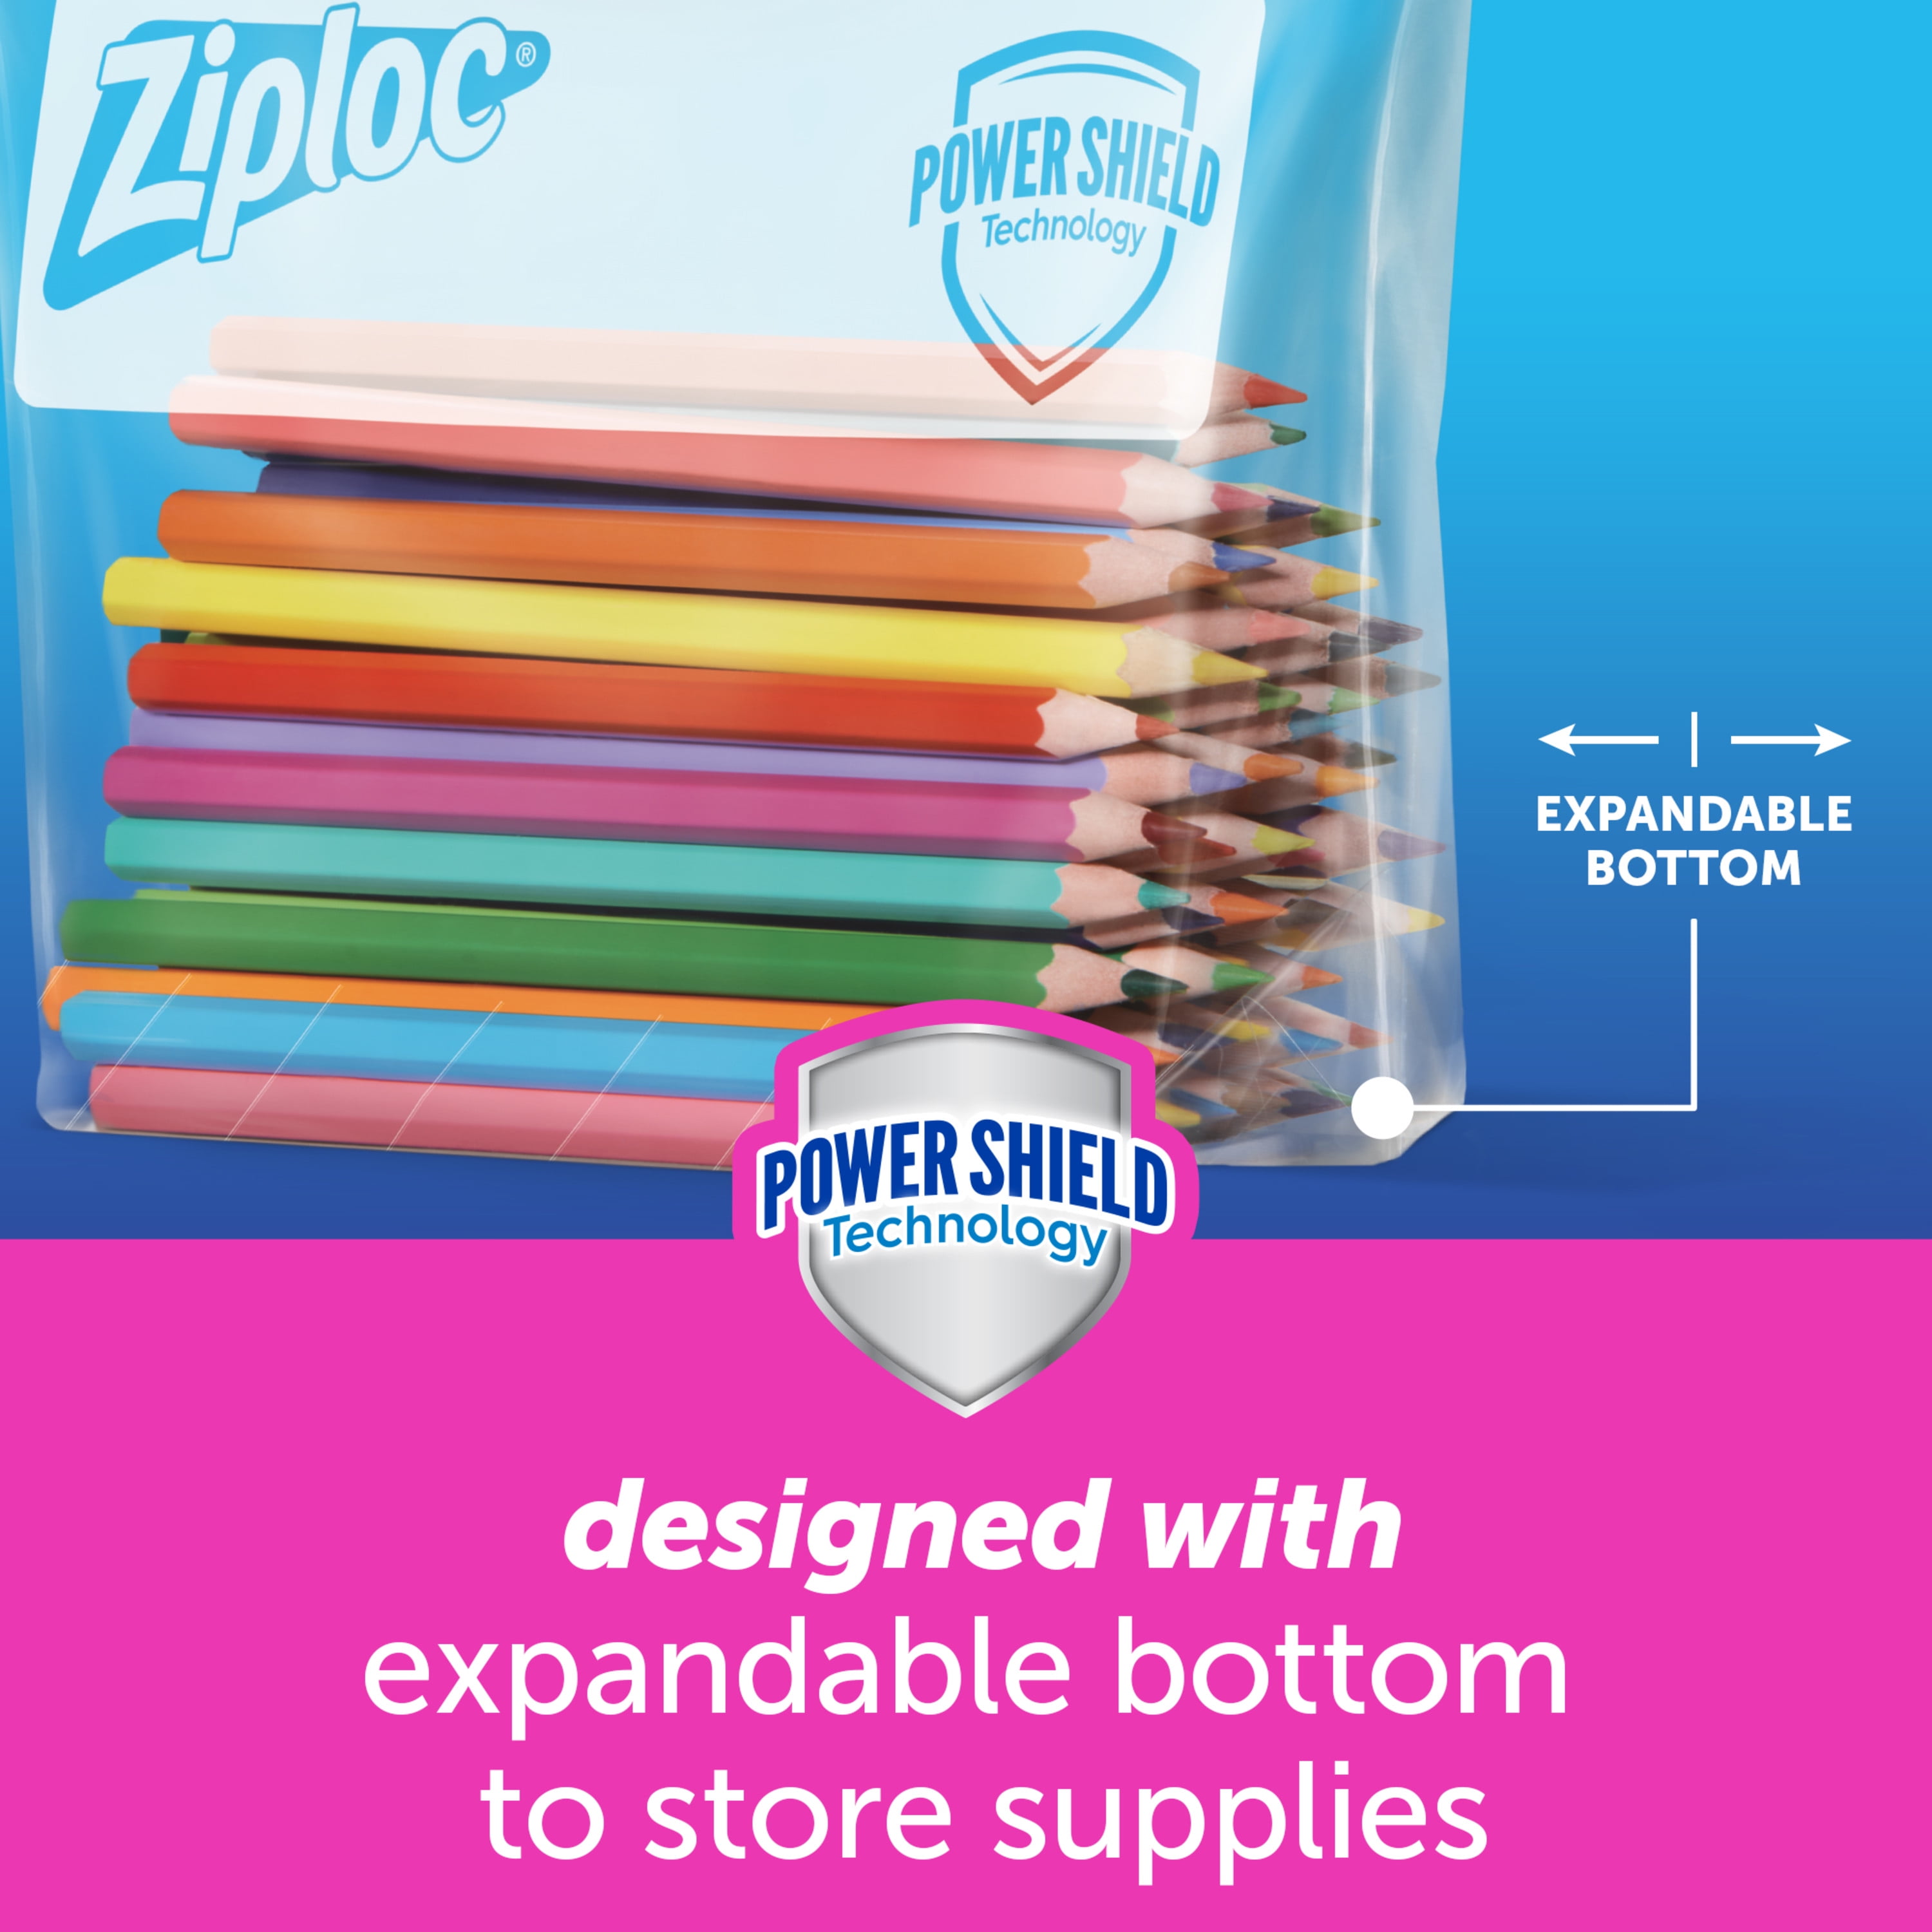 Ziploc® Brand Gallon Storage Bags with Grip 'n Seal™ Technology